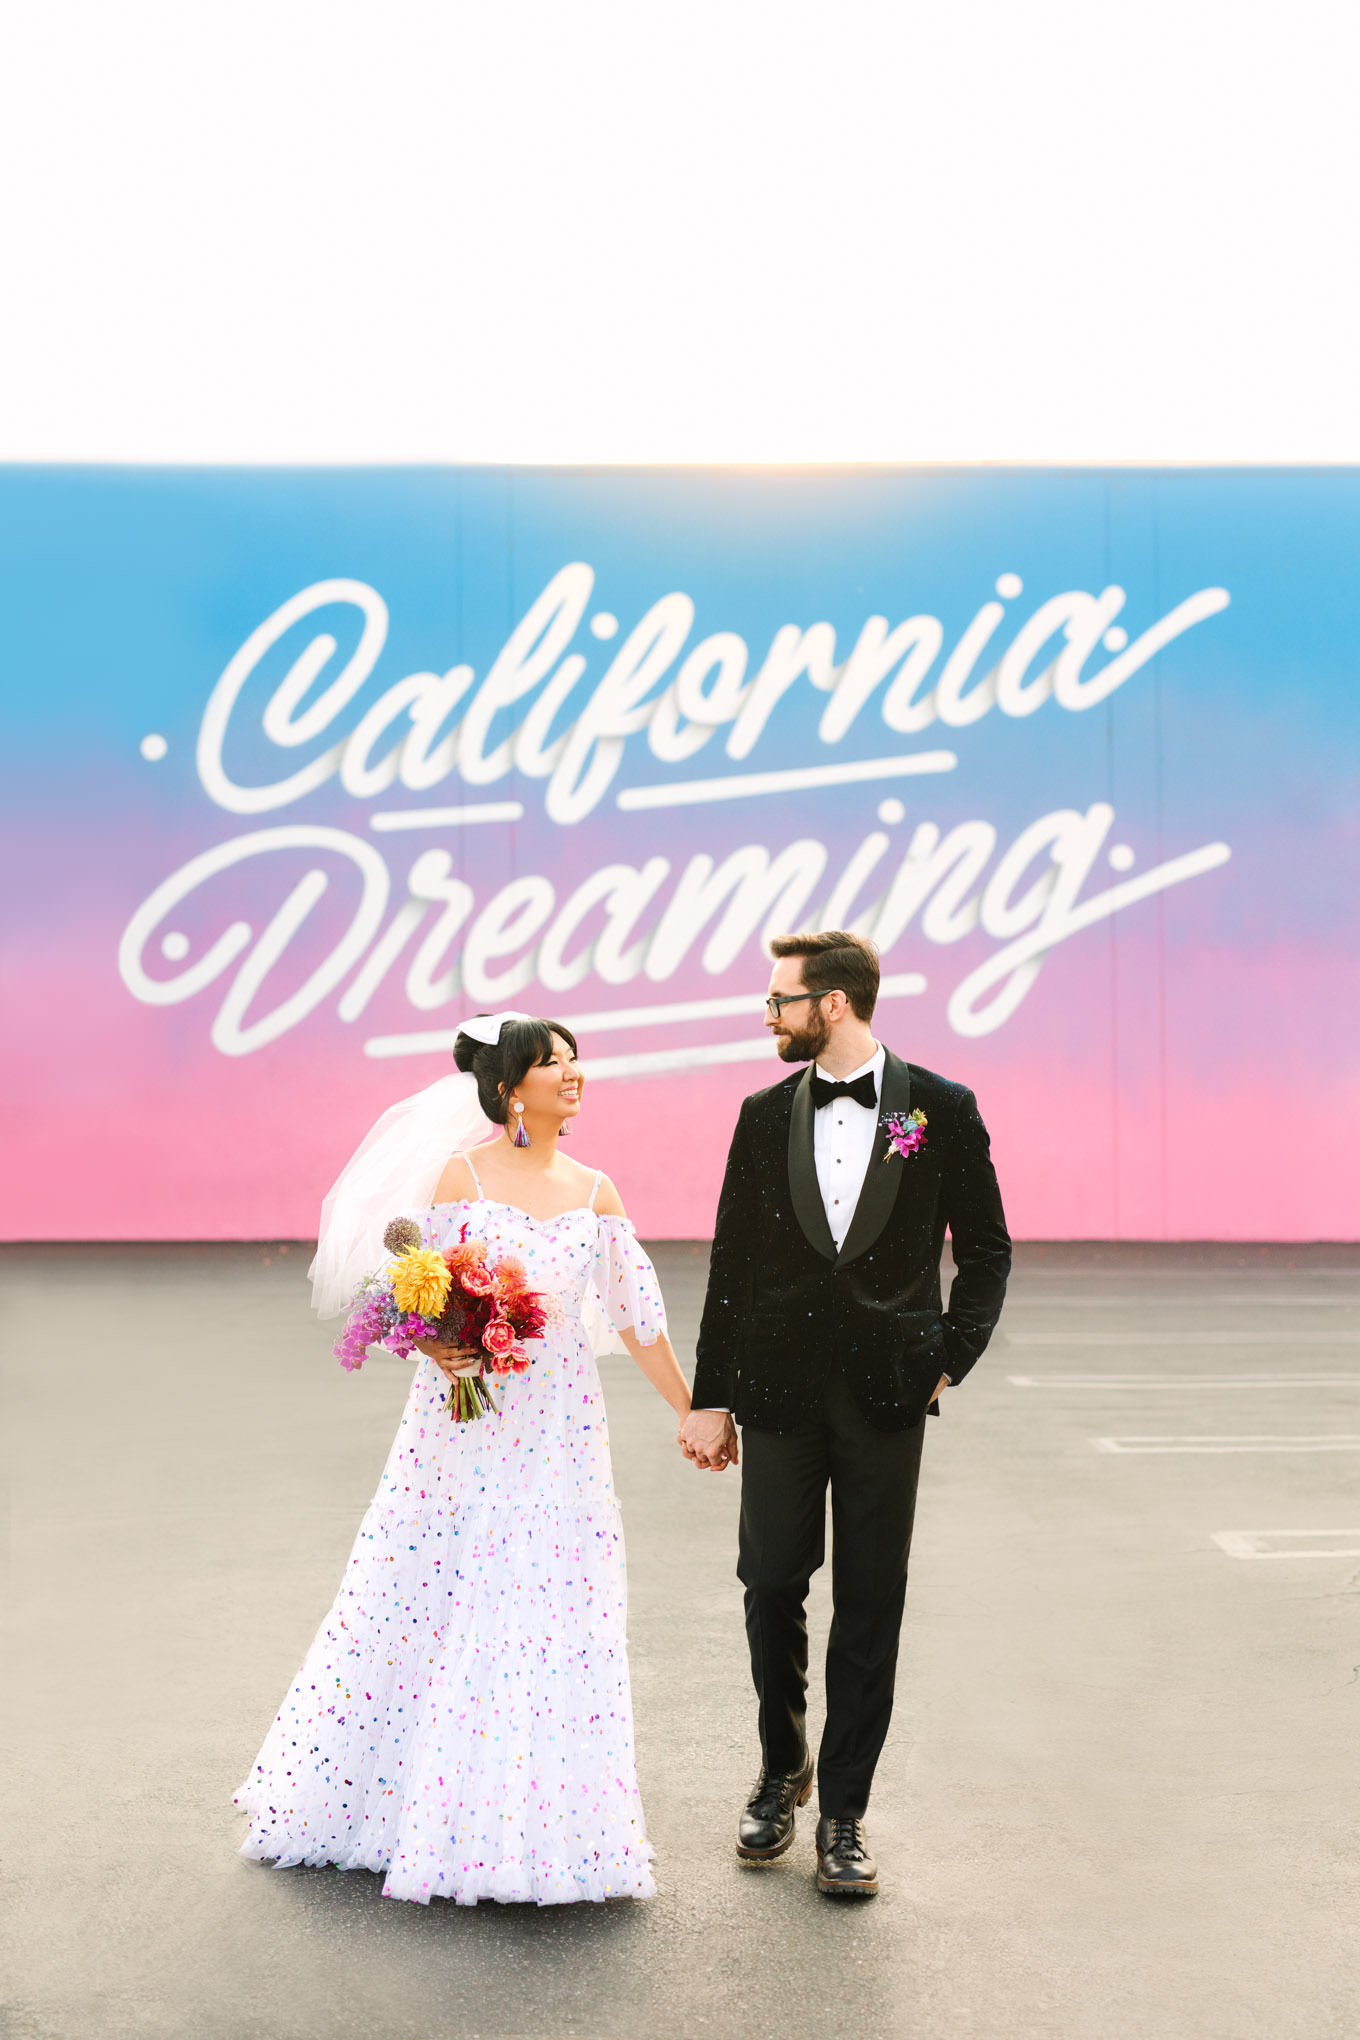 California Dreaming mural elopement | Engagement, elopement, and wedding photography roundup of Mary Costa’s favorite images from 2020 | Colorful and elevated photography for fun-loving couples in Southern California | #2020wedding #elopement #weddingphoto #weddingphotography #microwedding   Source: Mary Costa Photography | Los Angeles